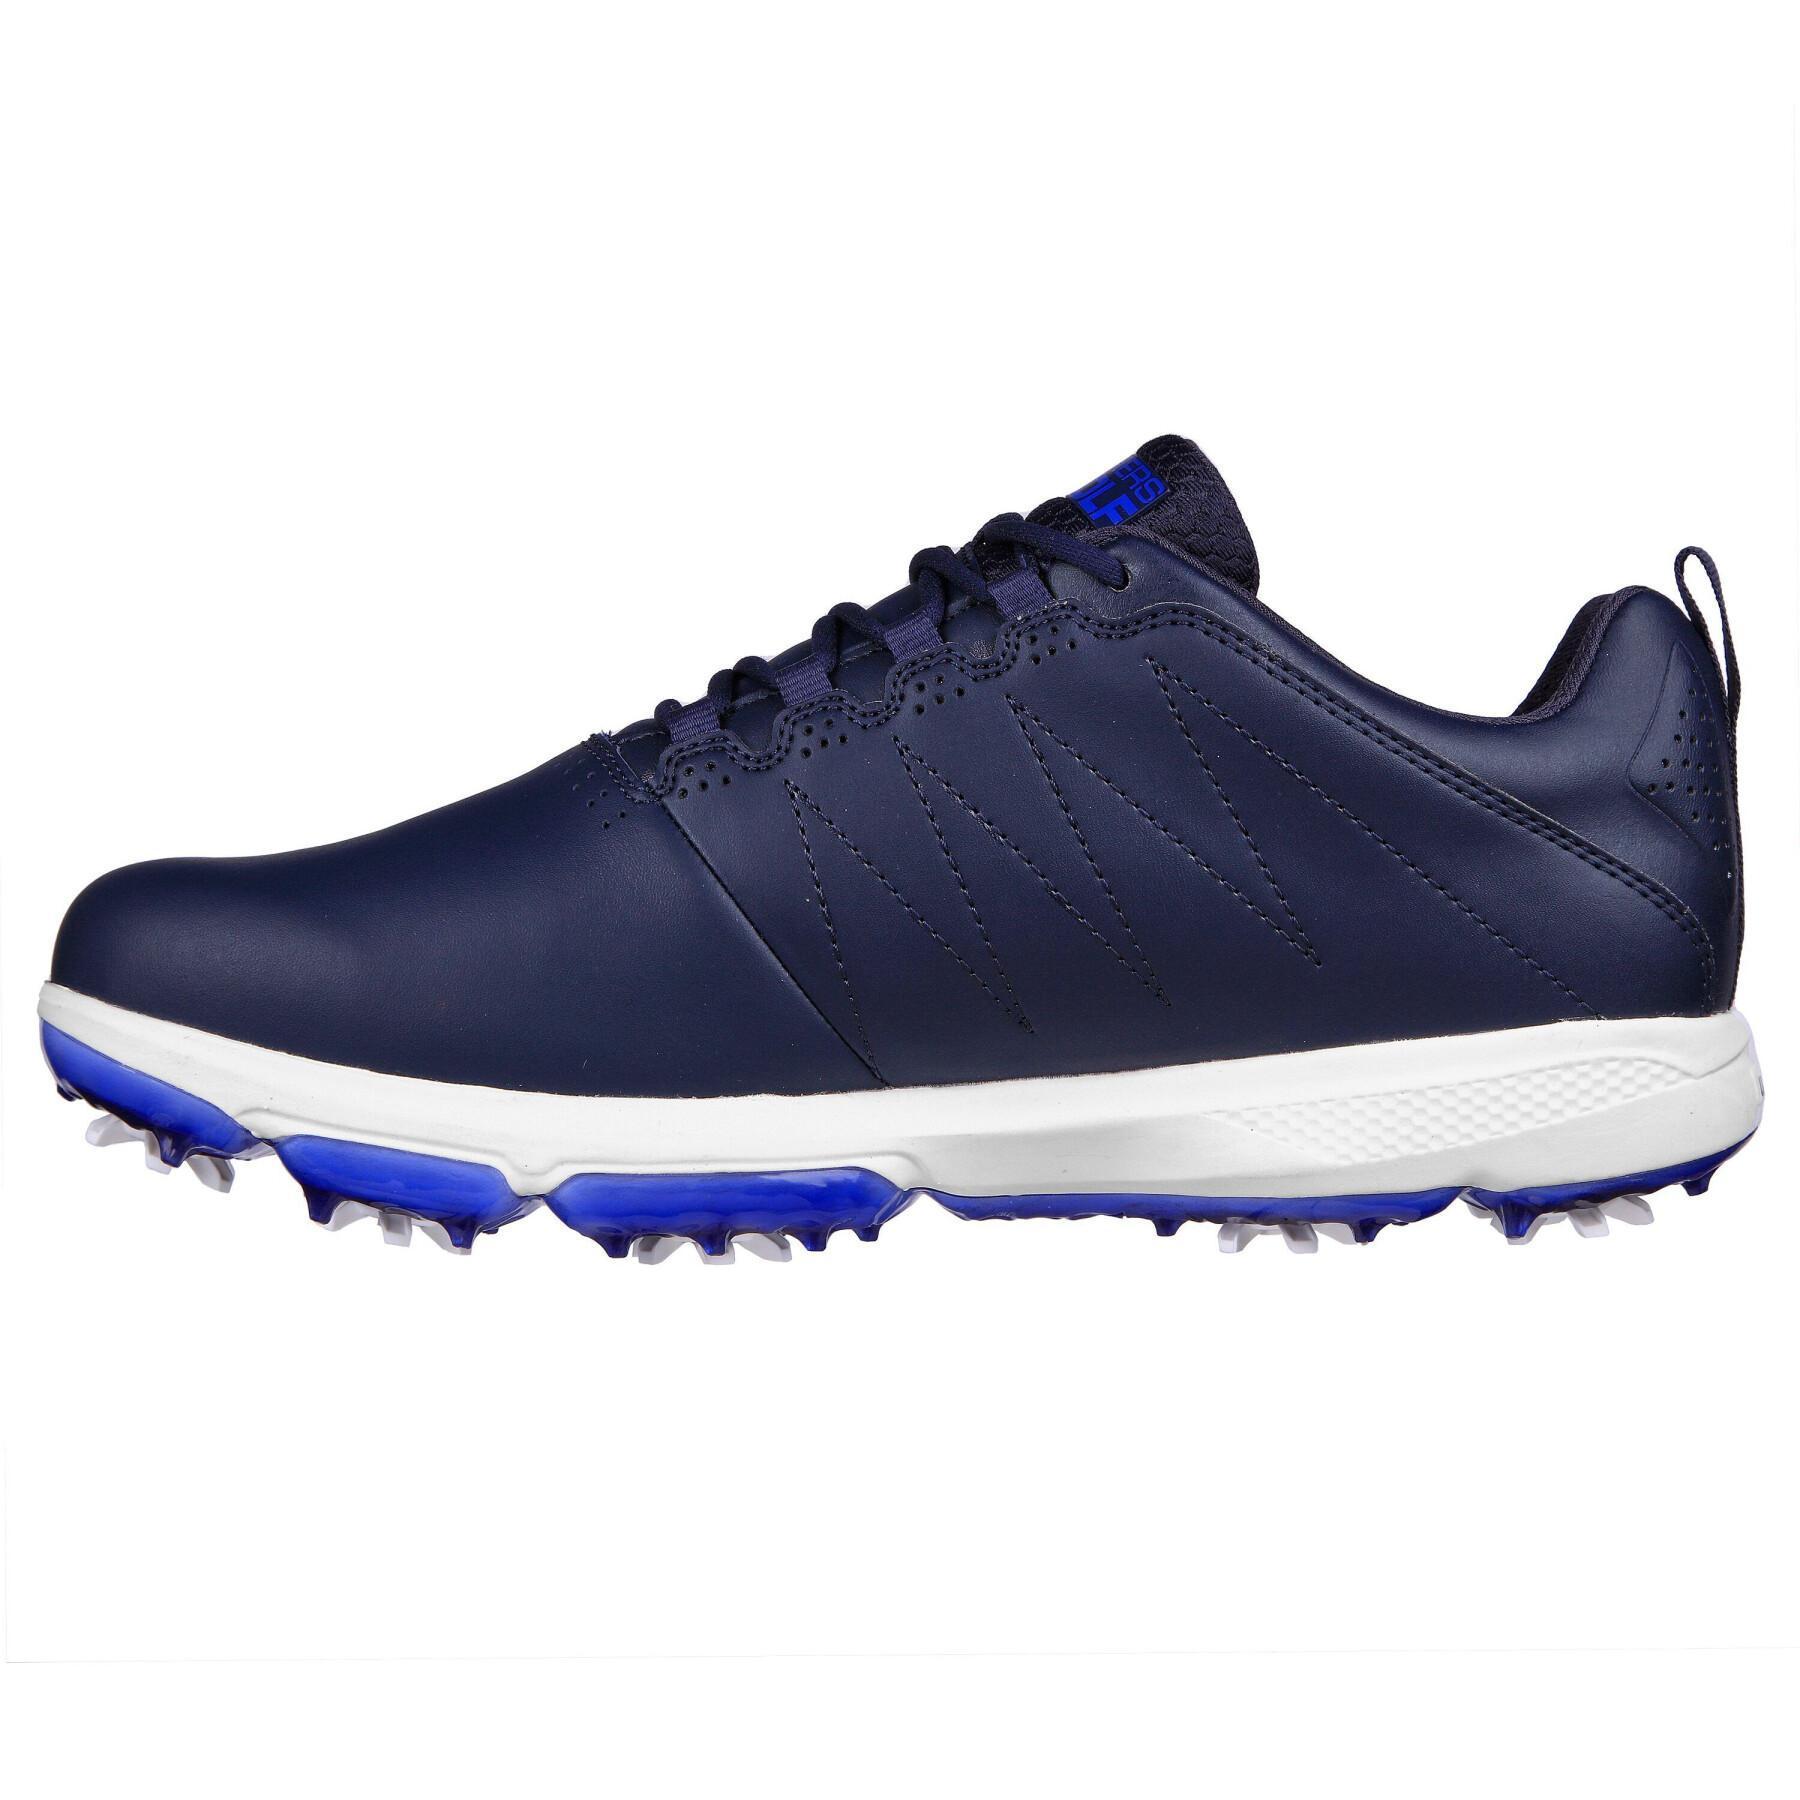 Golf shoes with spikes Skechers GO GOLF Pro 4 - Legacy